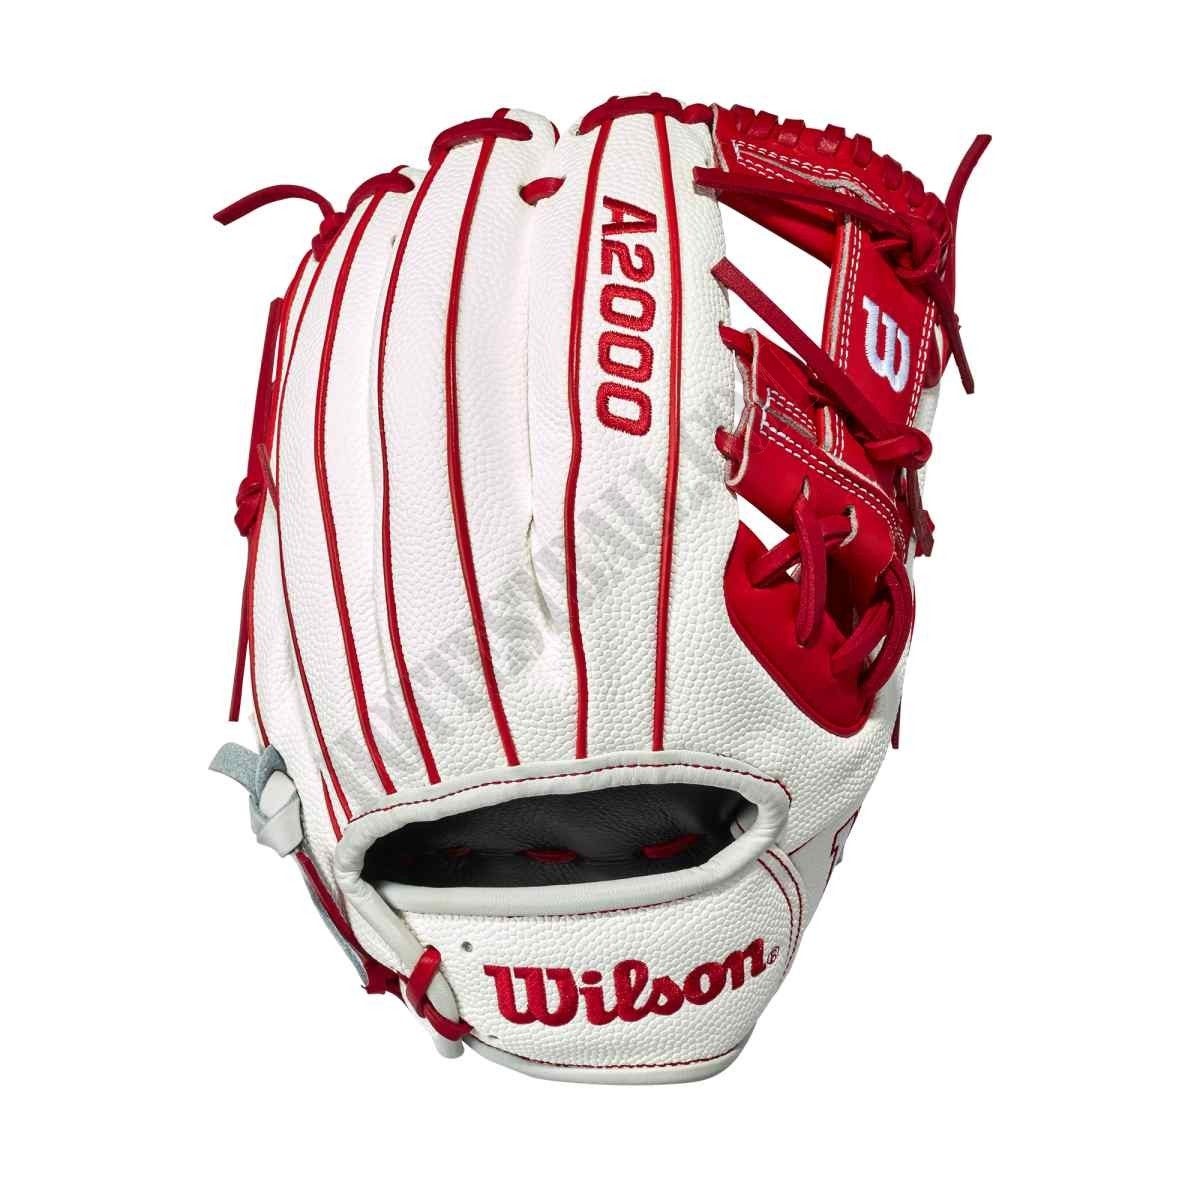 2021 A2000 1786SS Japan 11.5" Infield Baseball Glove - Limited Edition ● Wilson Promotions - -1